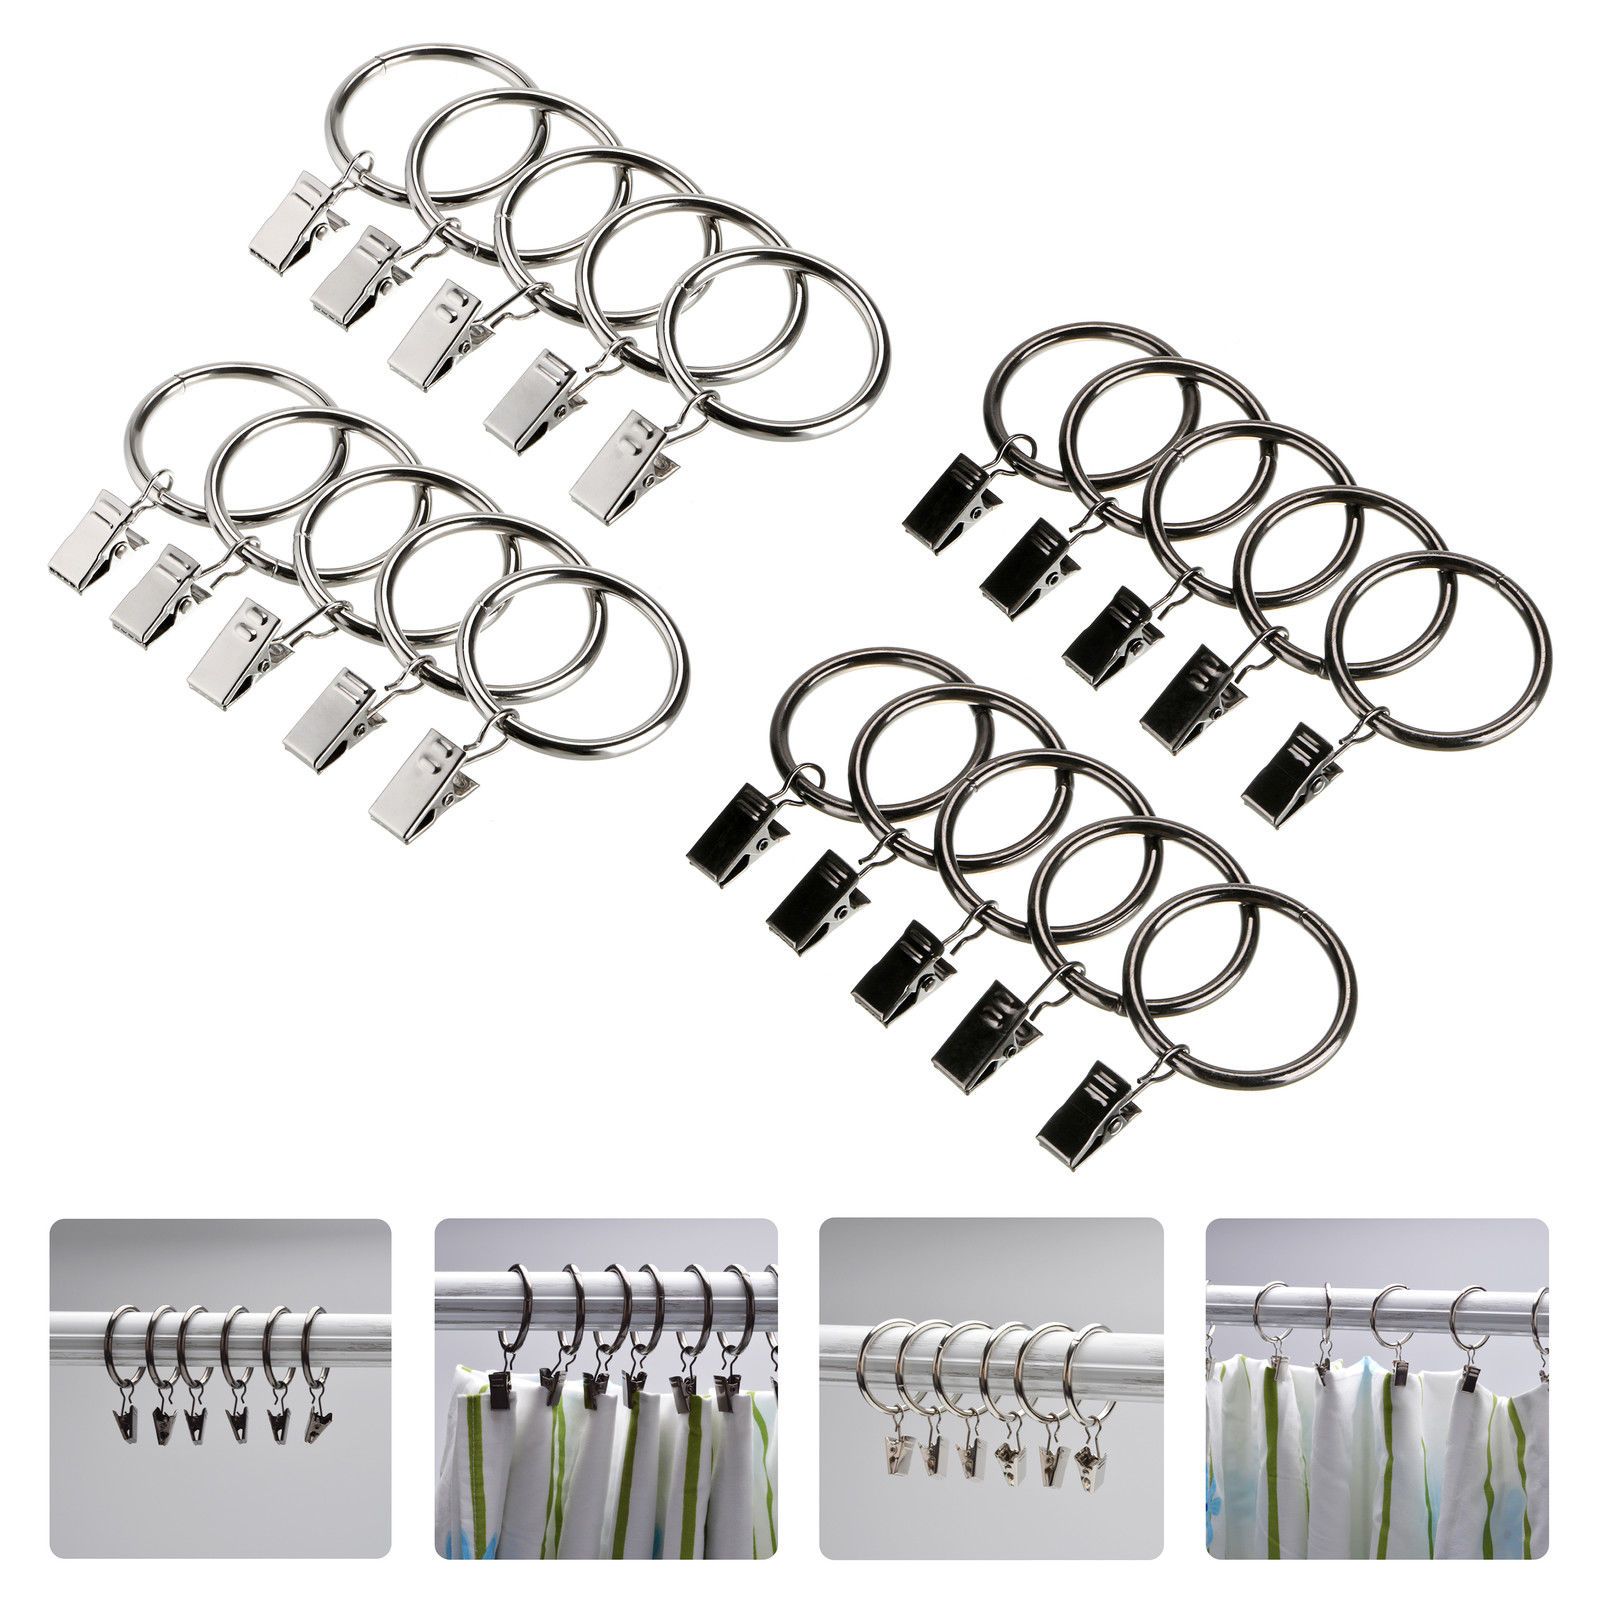 2020 New Set Of Silver Black Color Metal Curtain Pole Ring With Clips ...